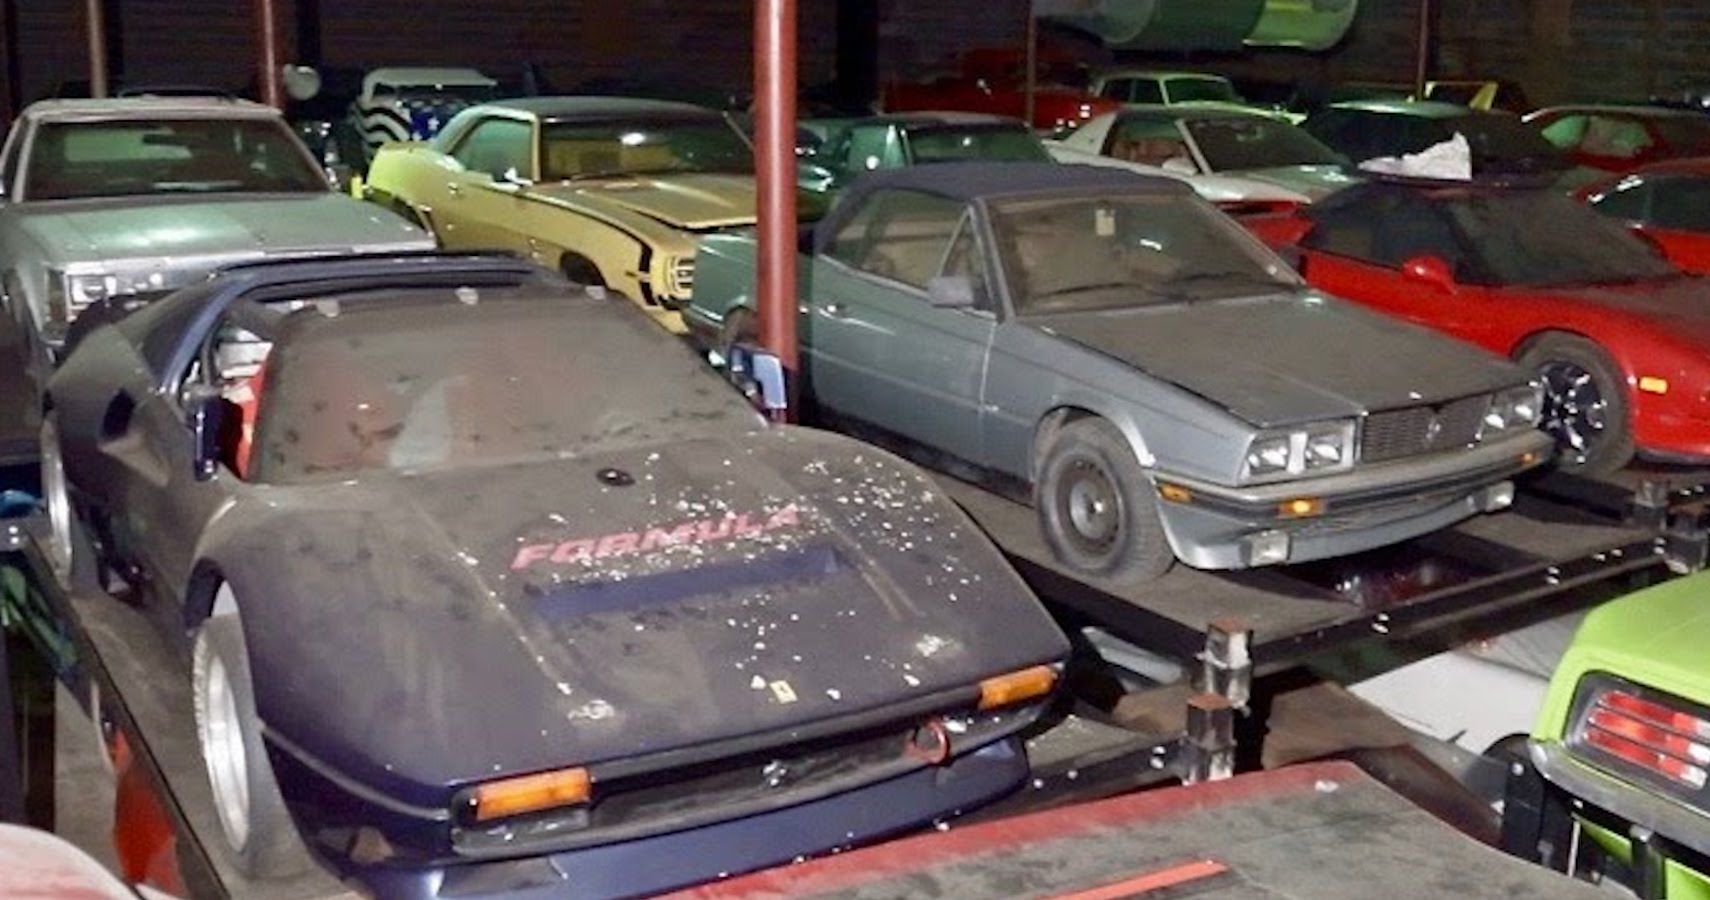 Check Out This Massive Barn Find Collection Someone Started In The '70s